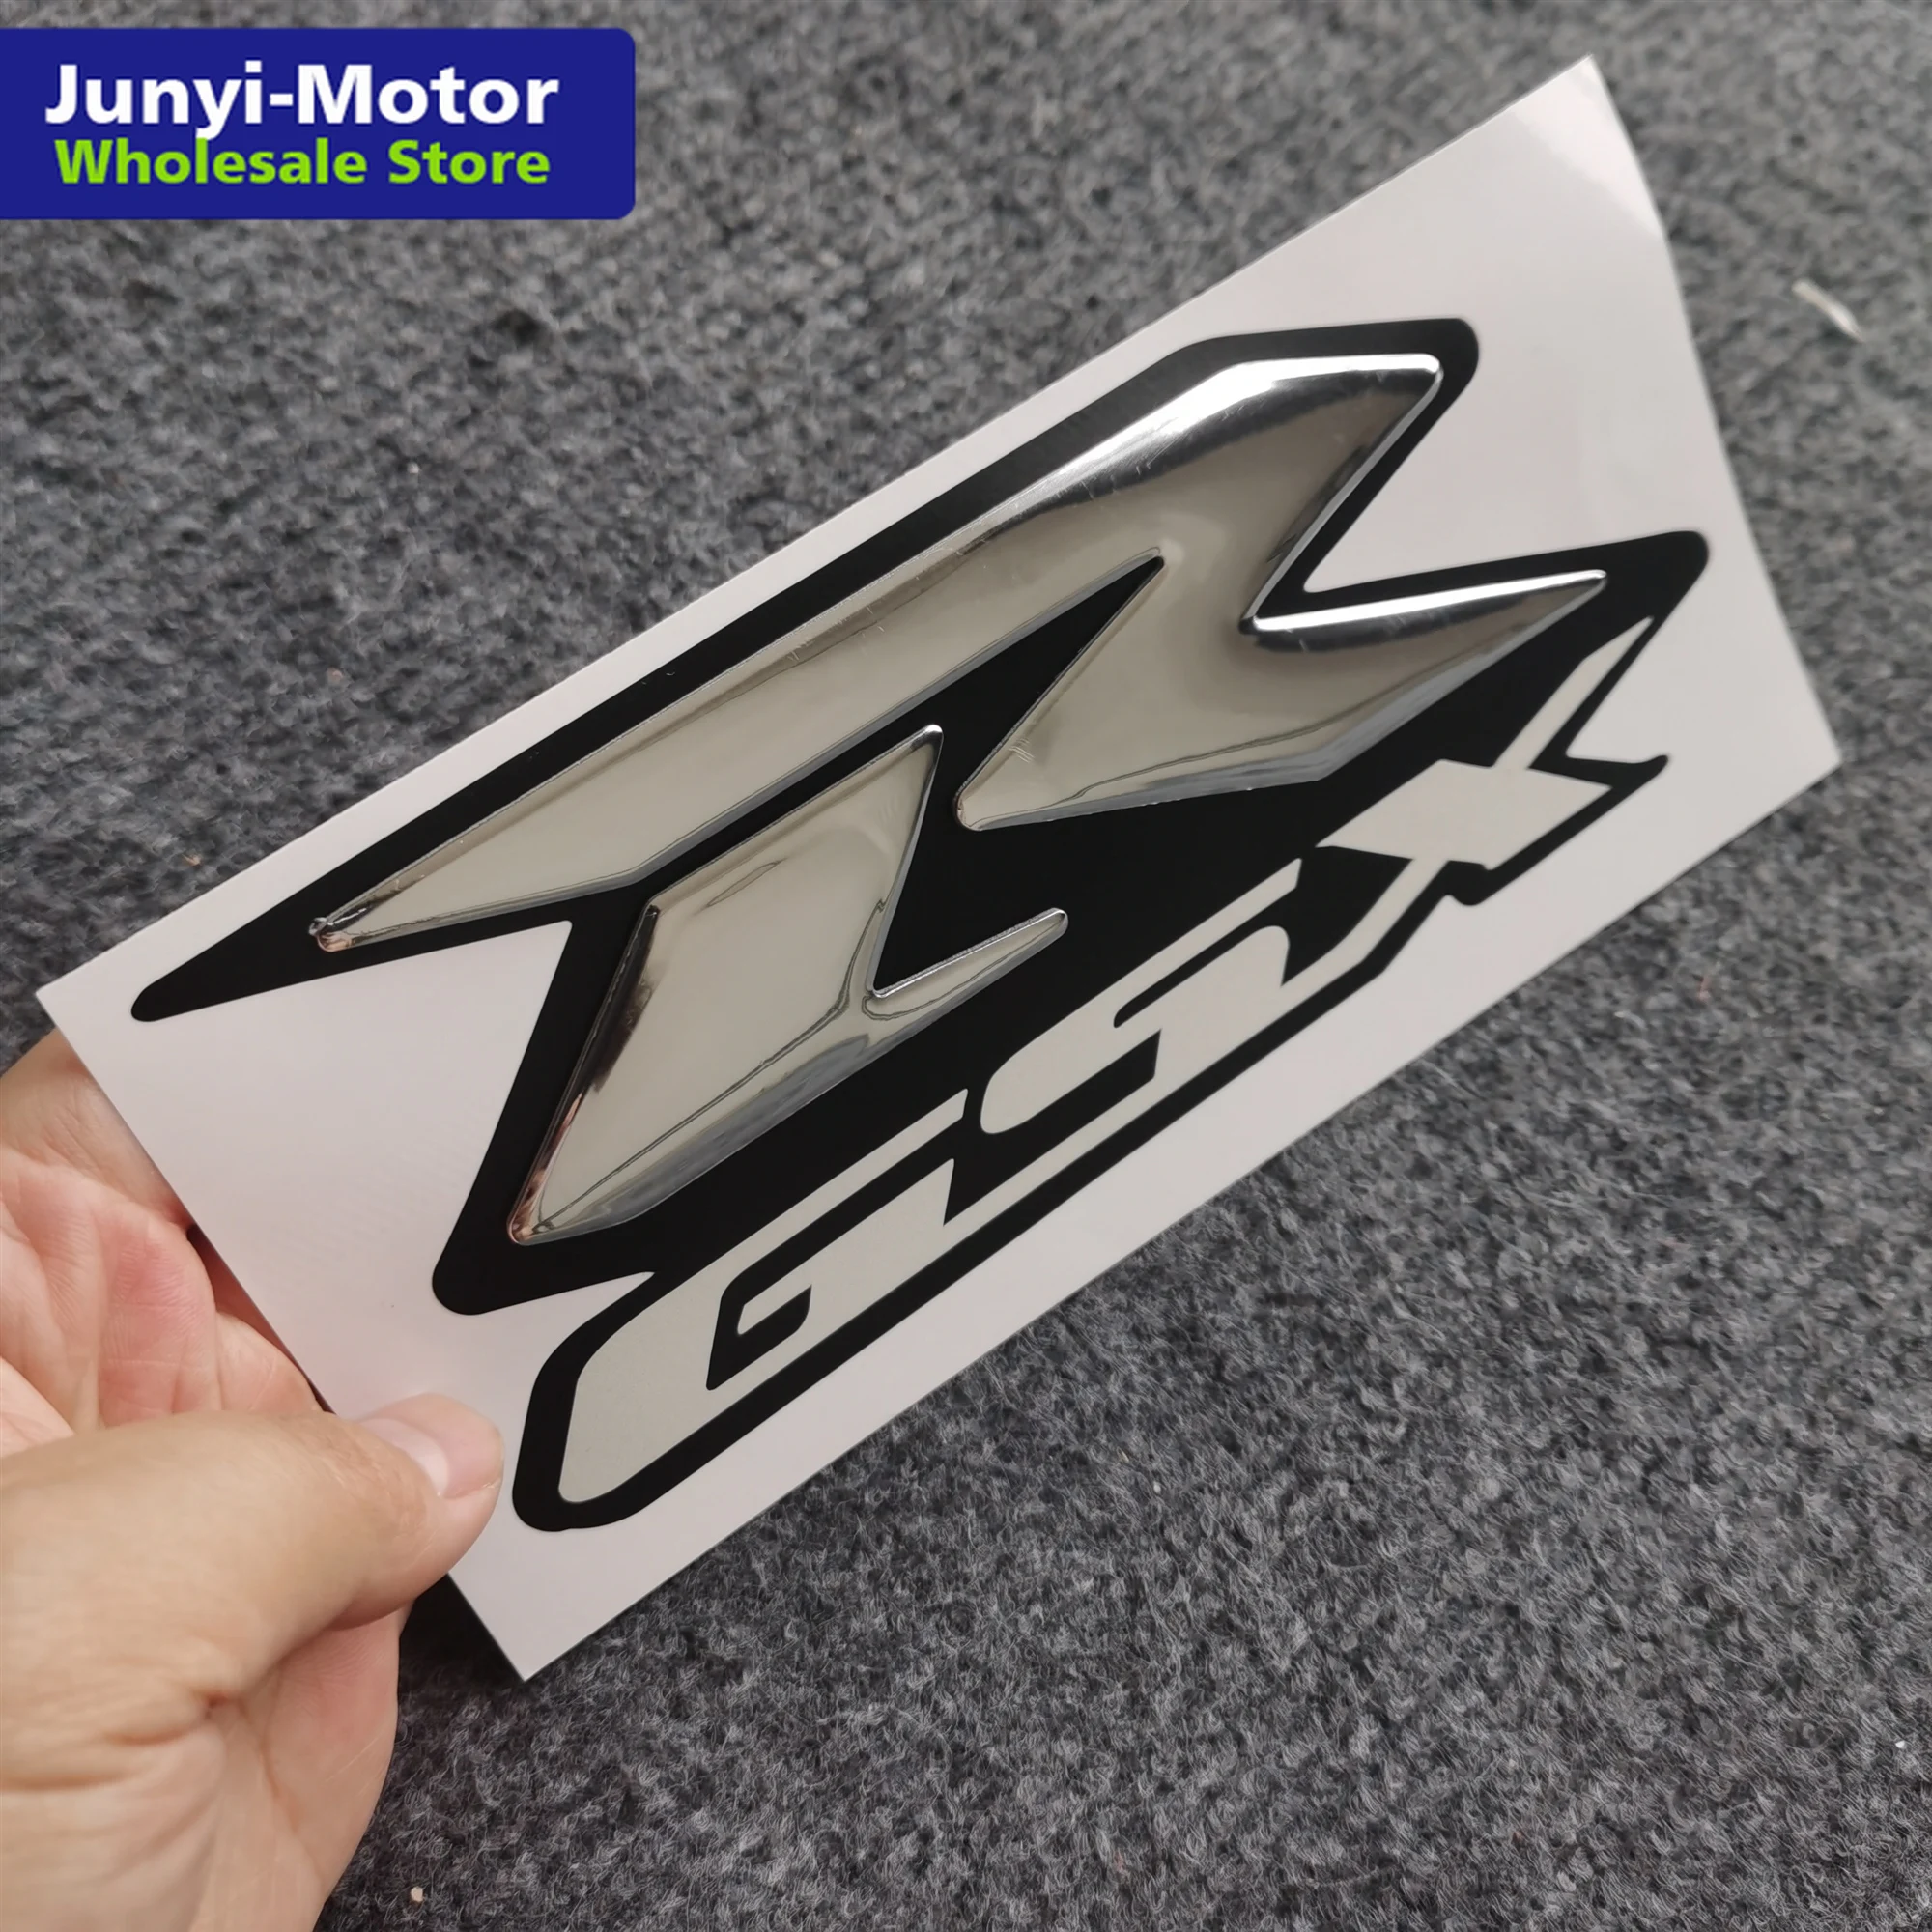 2pcs Silver 3d Fairing Tank Logo Decal Sticker For Suzuki Gsx R Gsxr 600 750 1000 1100 Motorcycle Cruisers Chopper Racing Emblem Buy At The Price Of 9 In Aliexpress Com Imall Com